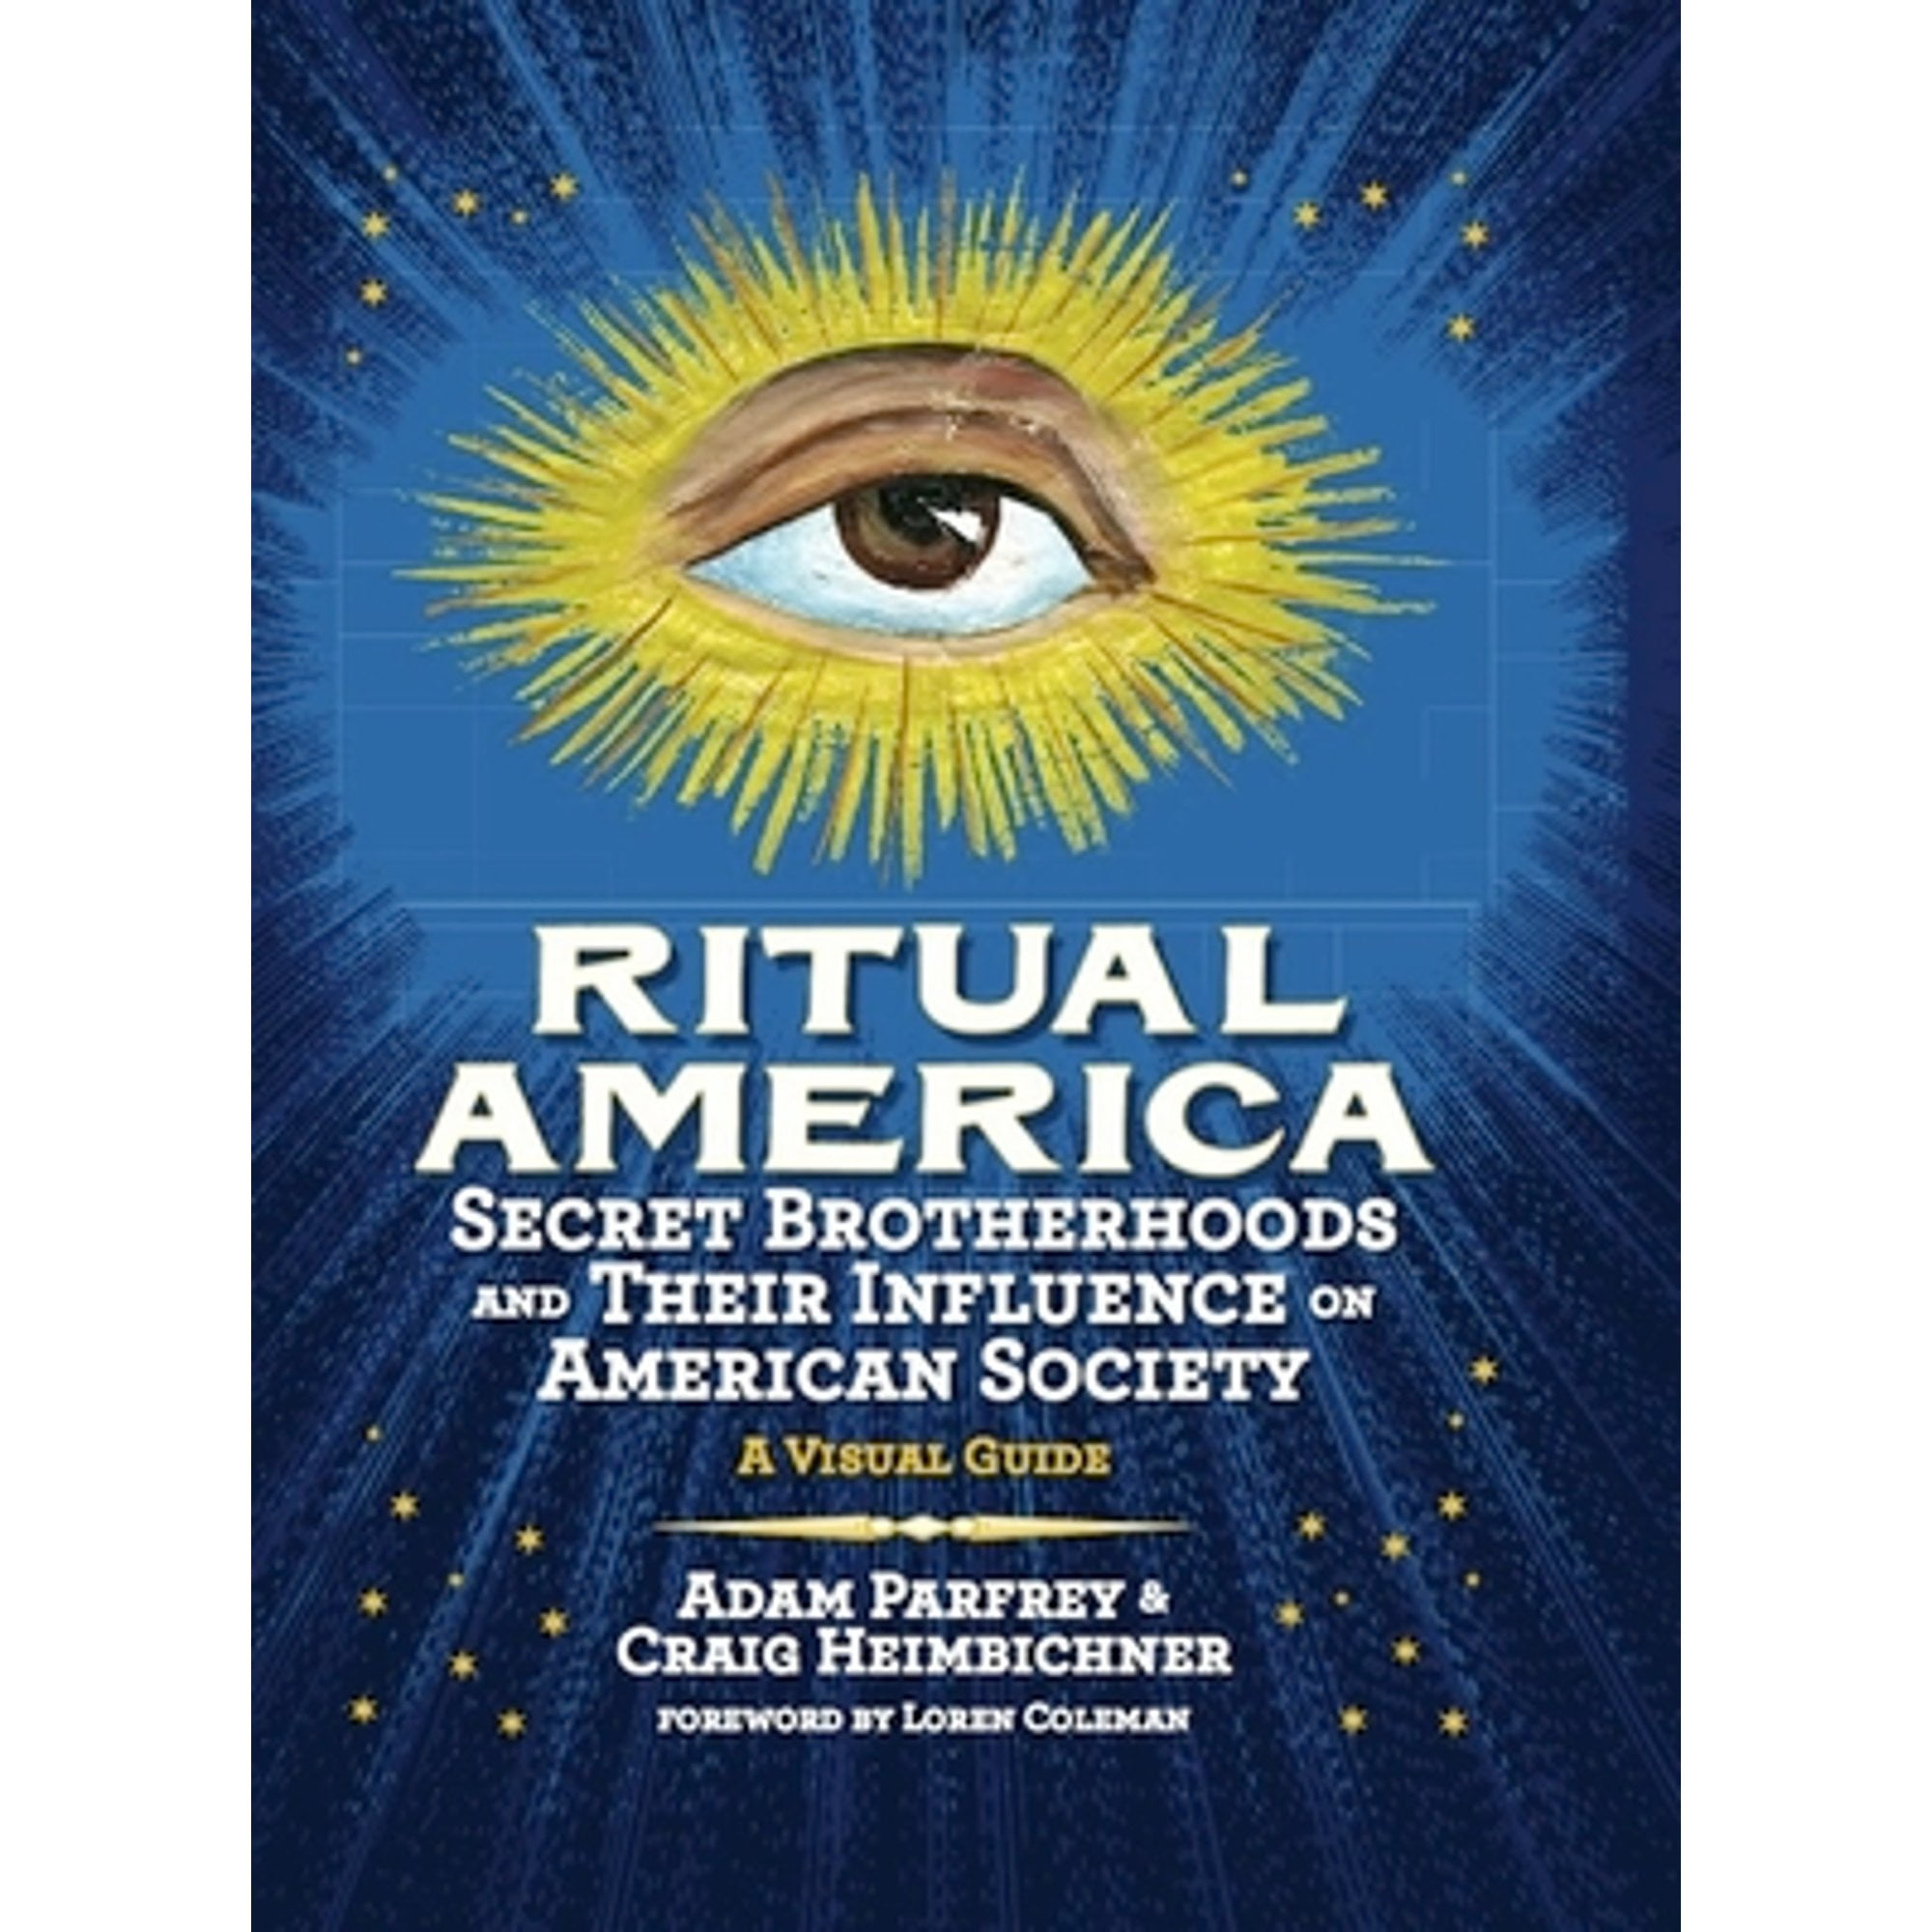 Pre-Owned Ritual America: Secret Brotherhoods and Their Influence on American Society: A Visual (Hardcover 9781936239146) by Craig Heimbichner, Adam Parfrey